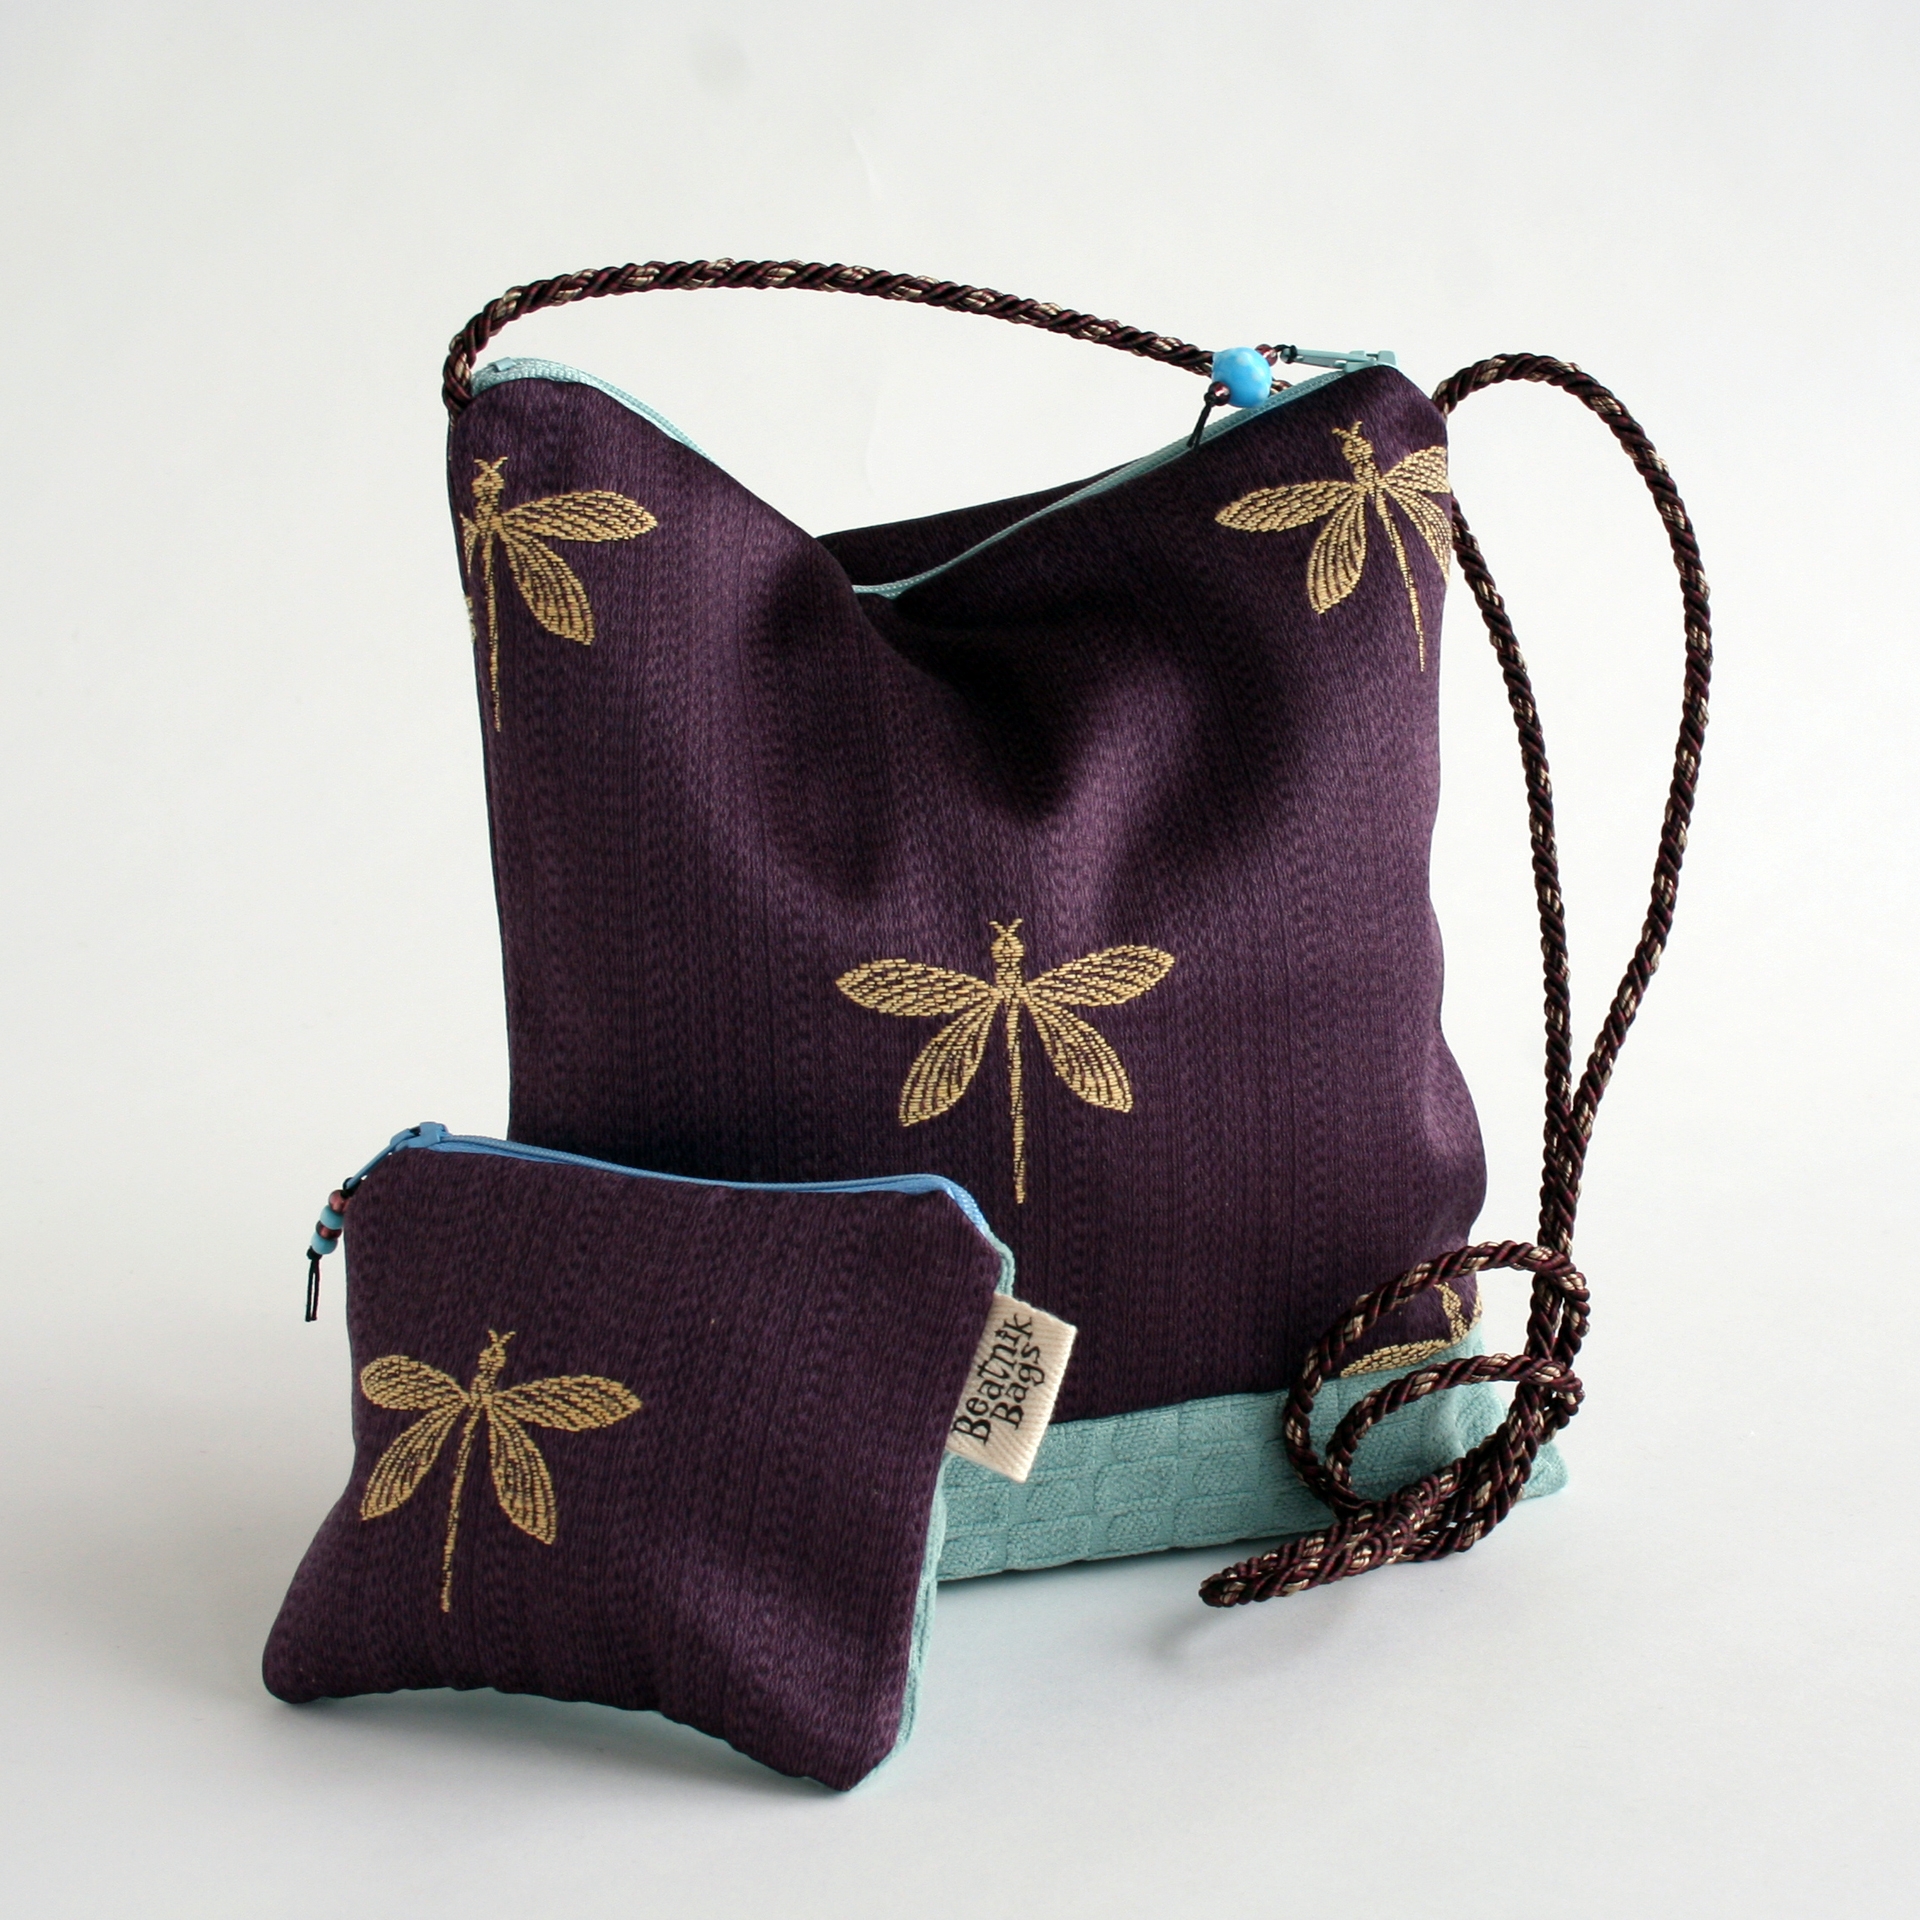 Square bag and coin purse